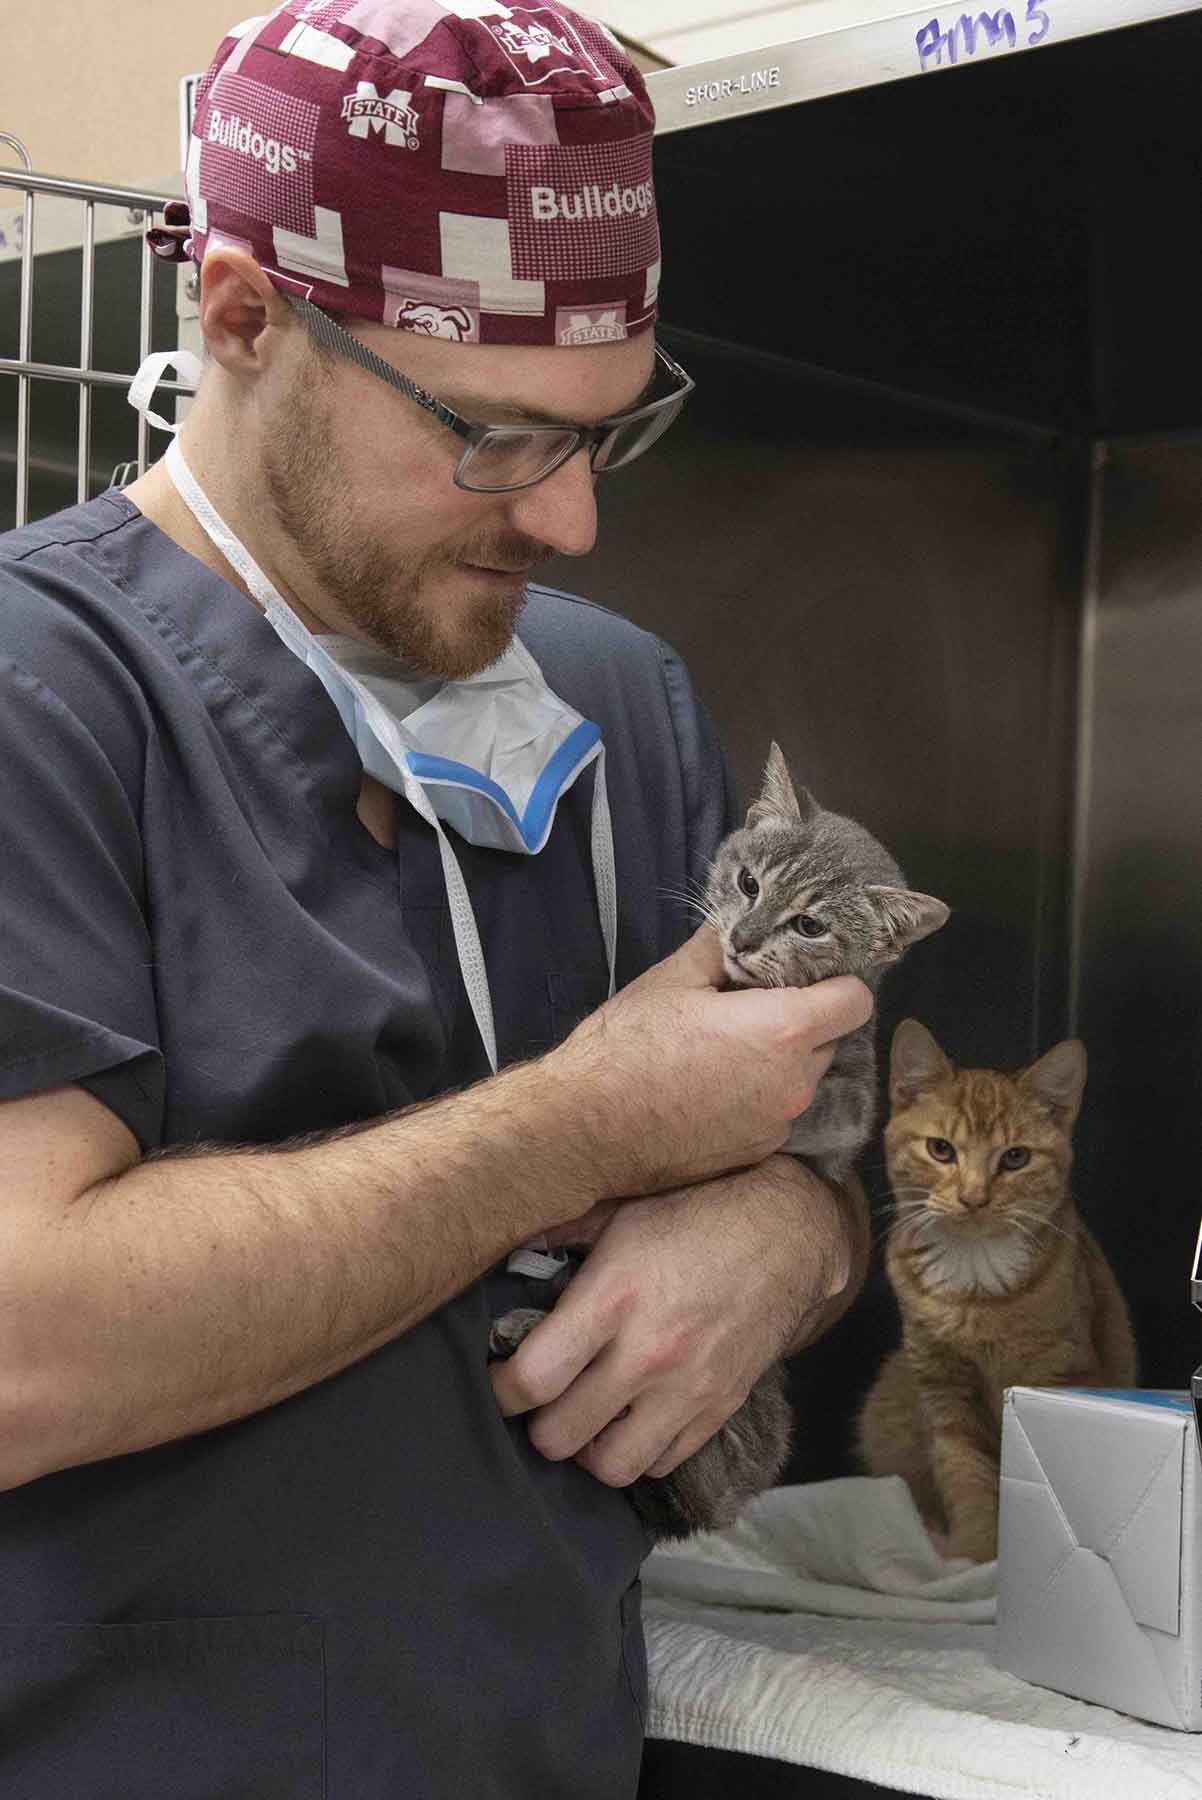 A clinician examines kittens in a kennel